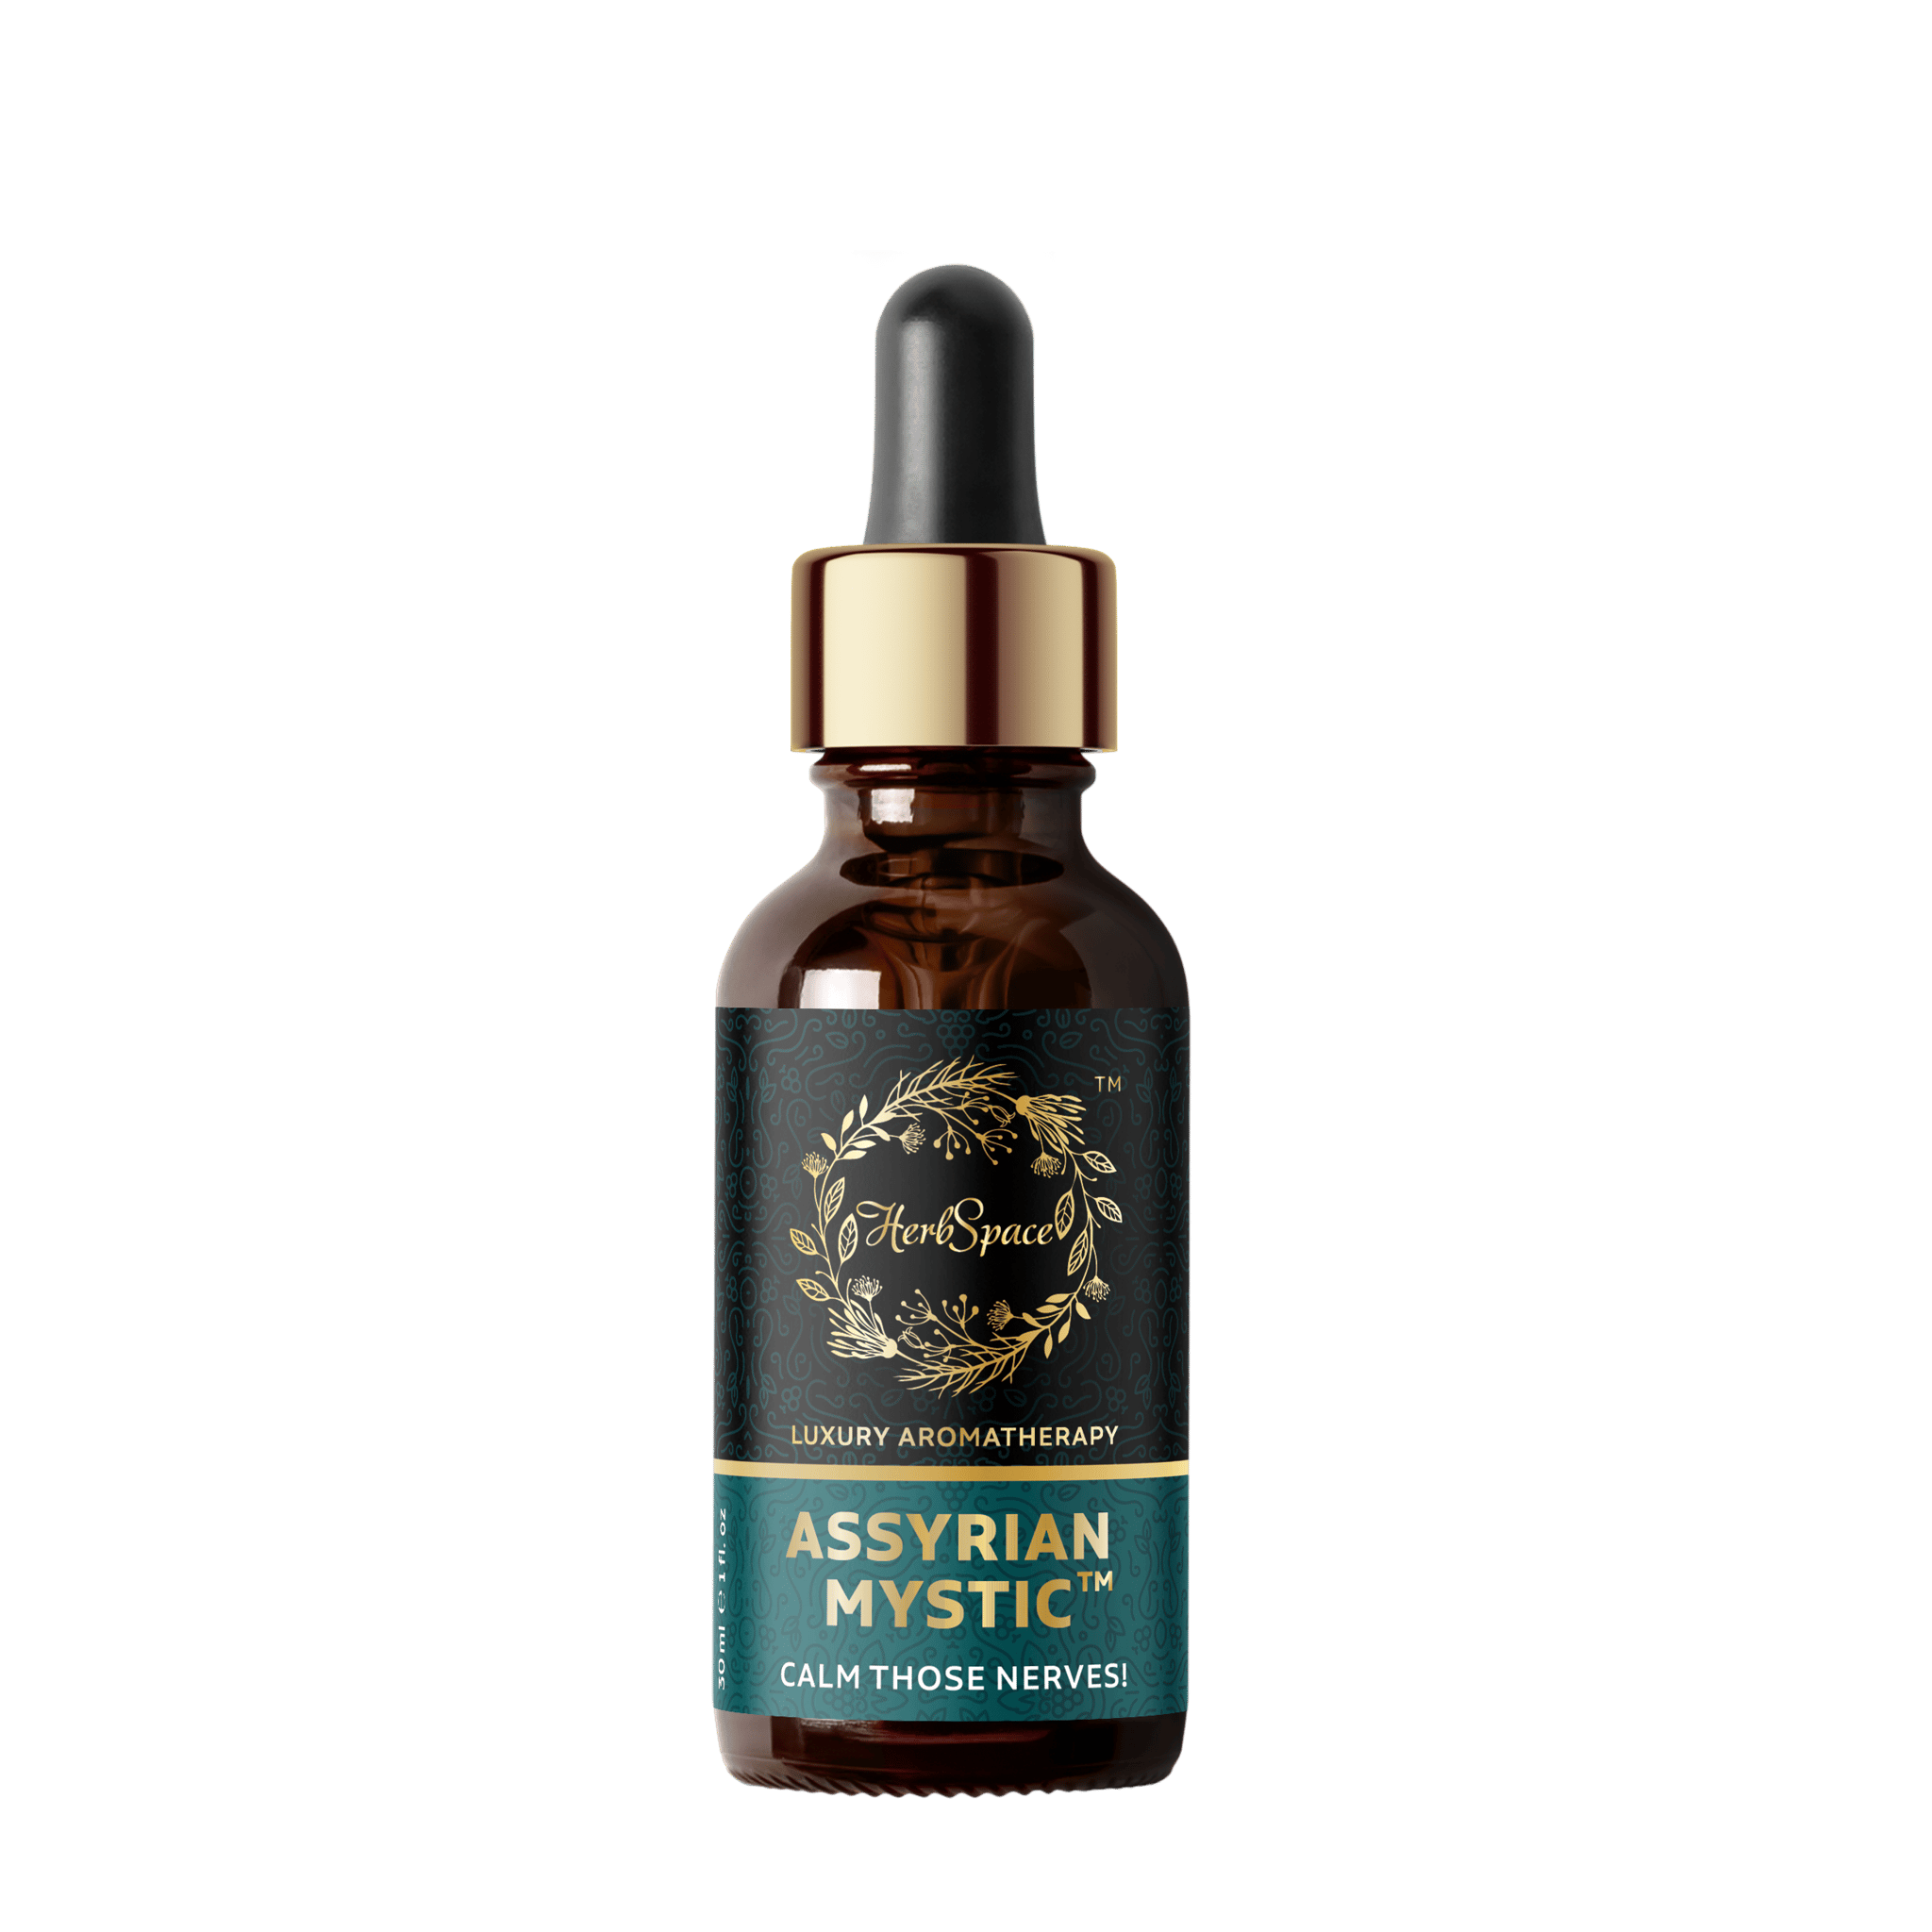 HerbSpace Assyrian Mystic - Stress Relief Oil (8 gms)